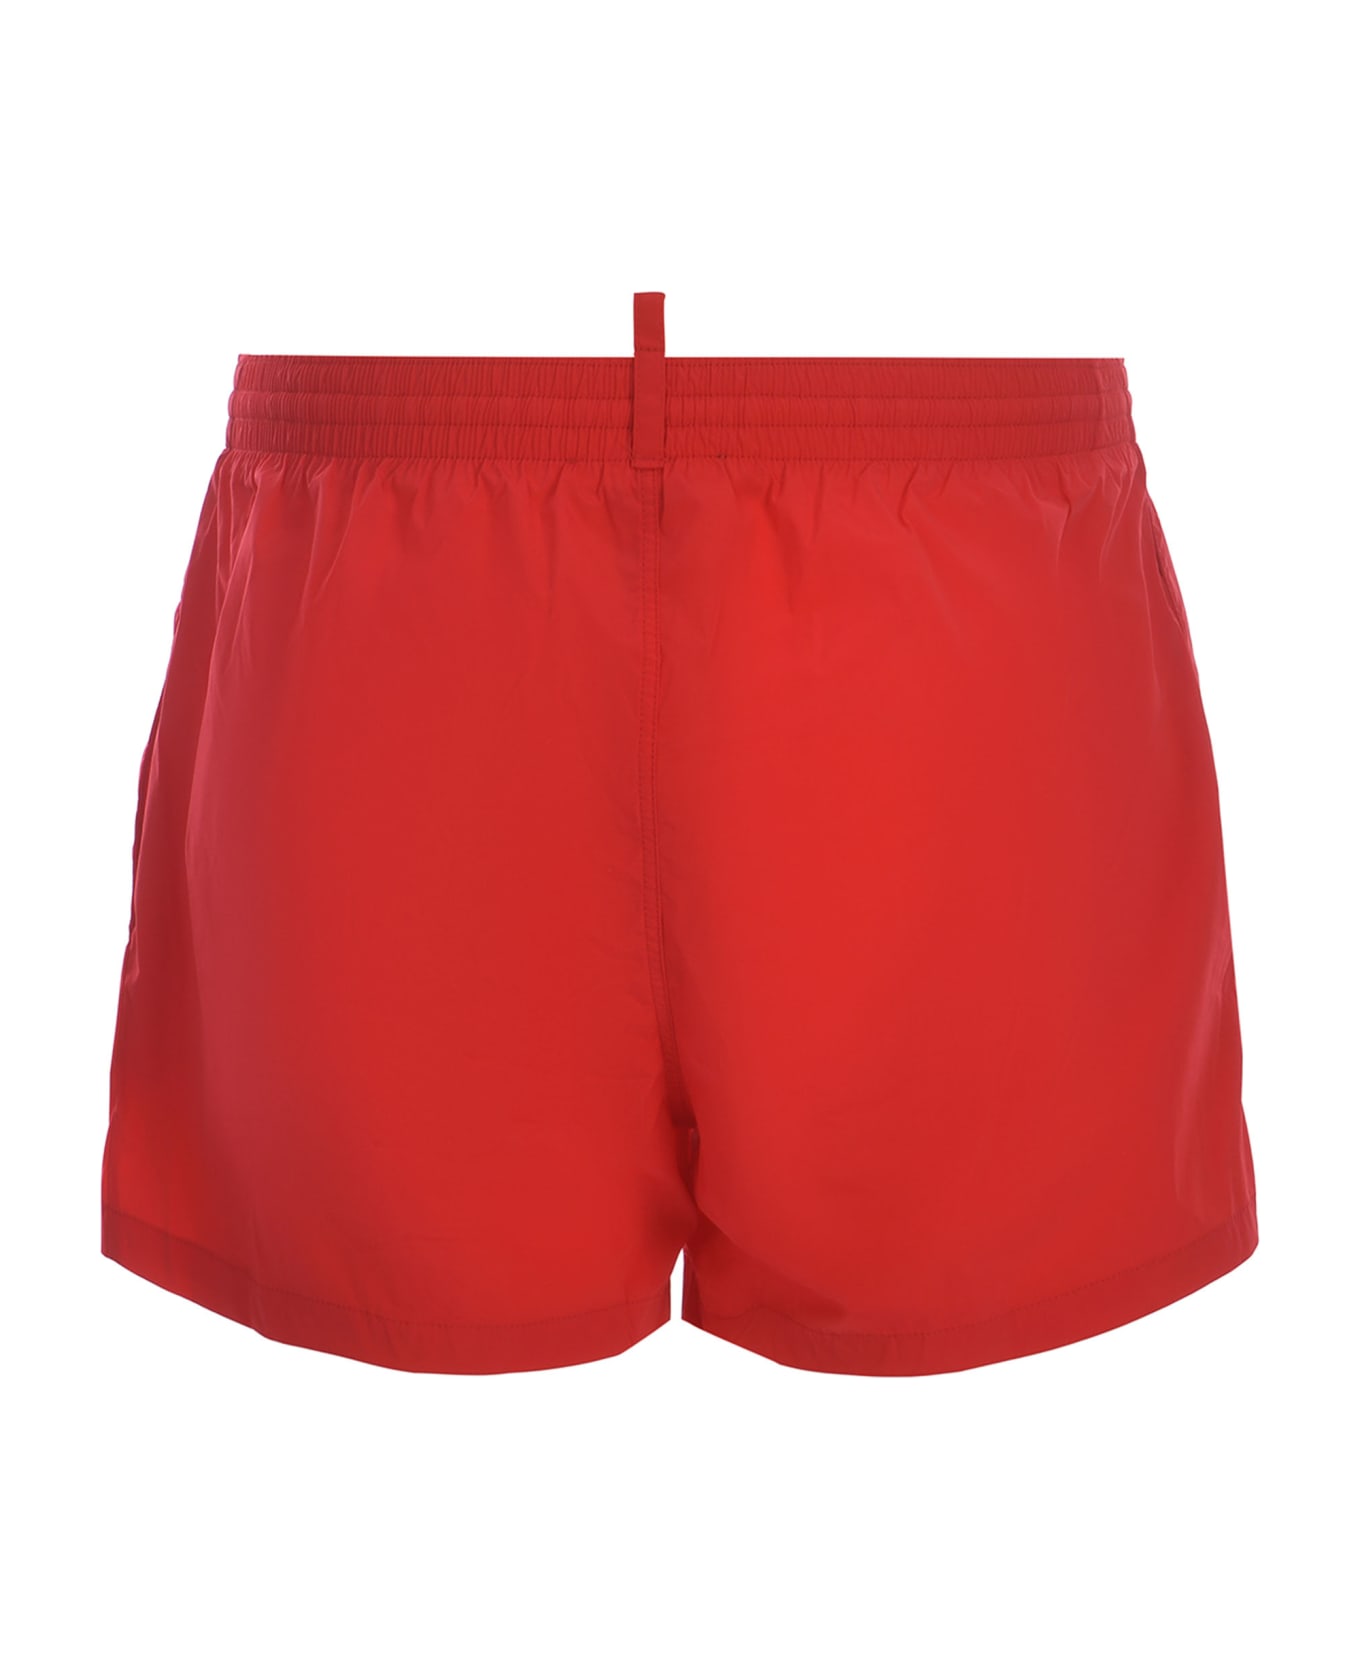 Dsquared2 Swimsuit Dsquared2 Made Of Nylon - Rosso